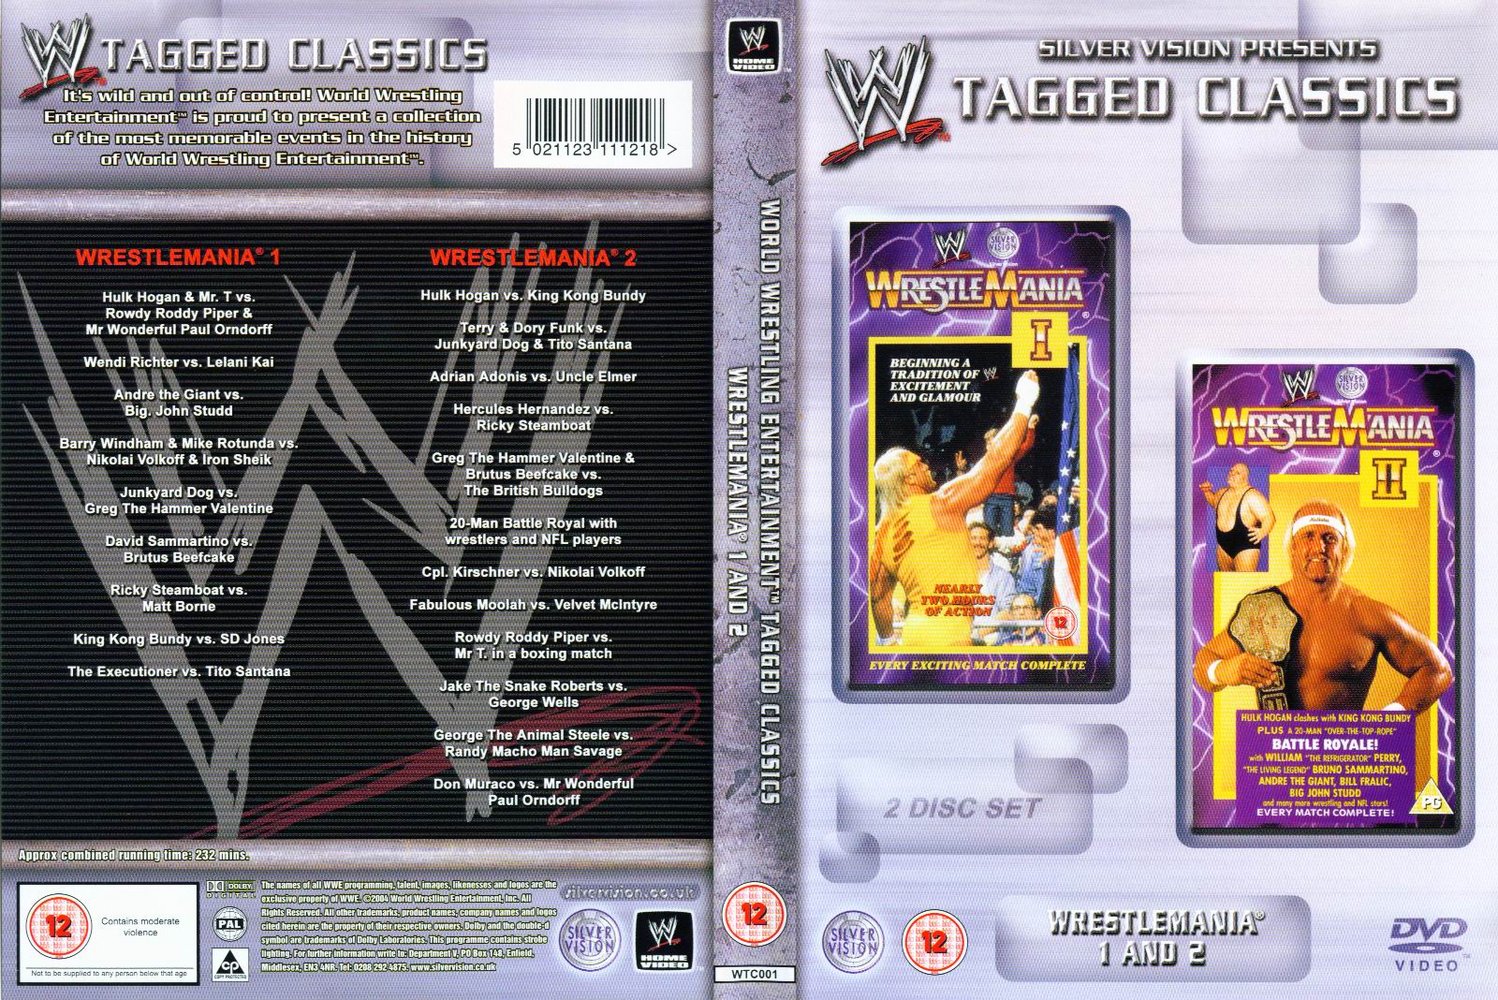 Jaquette DVD WWE Wrestlemania 1-2 Tagged Classics